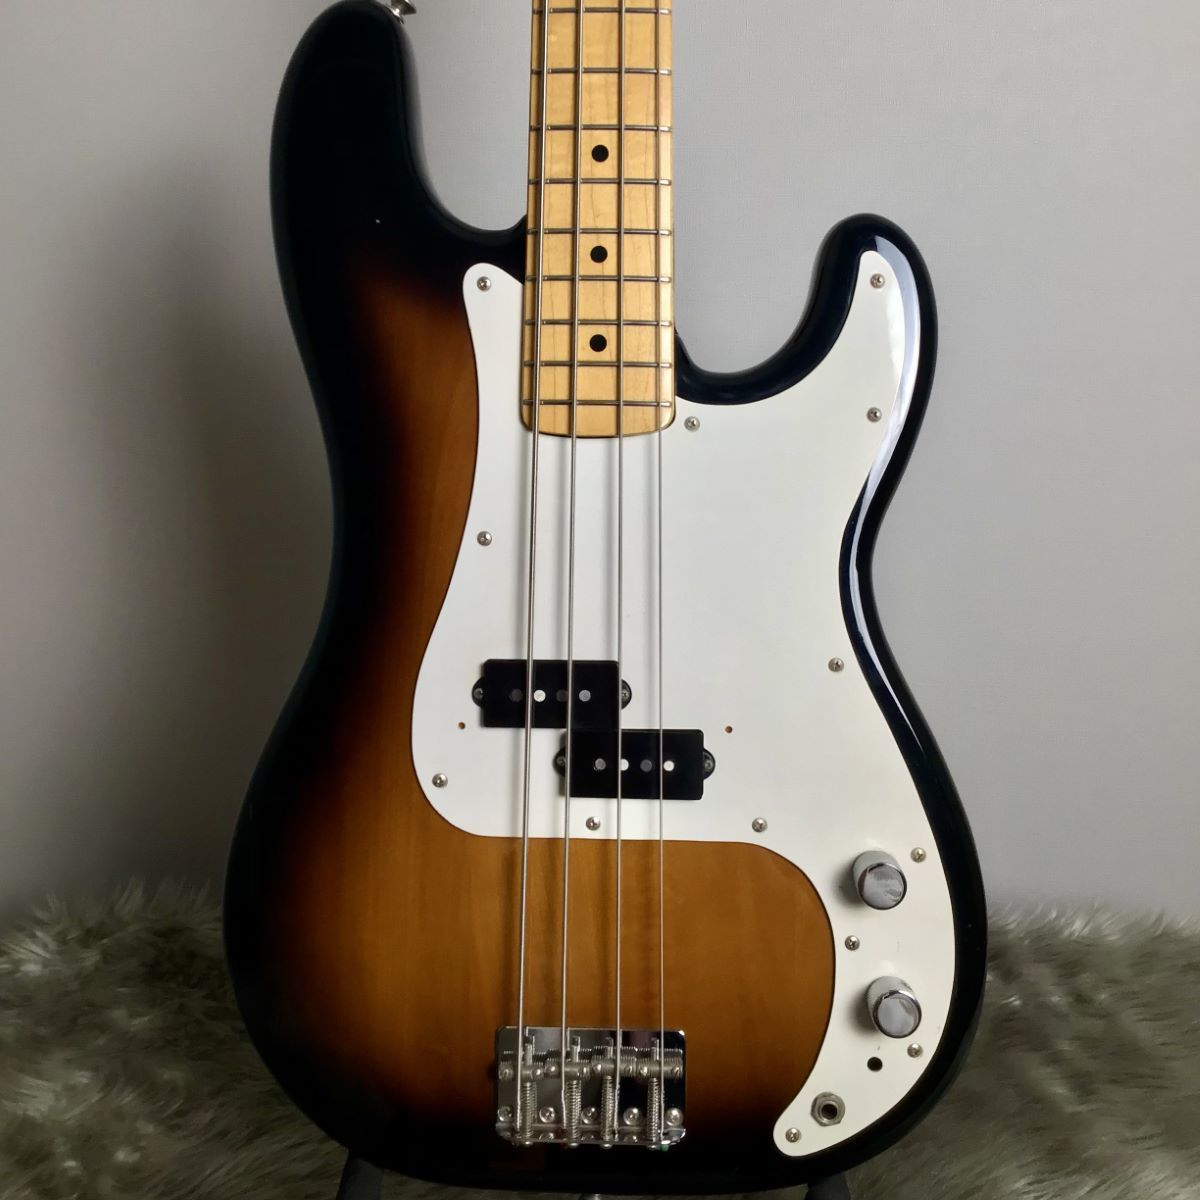 Squier by Fender Squier by Fender Precision Bass 1982 made in 